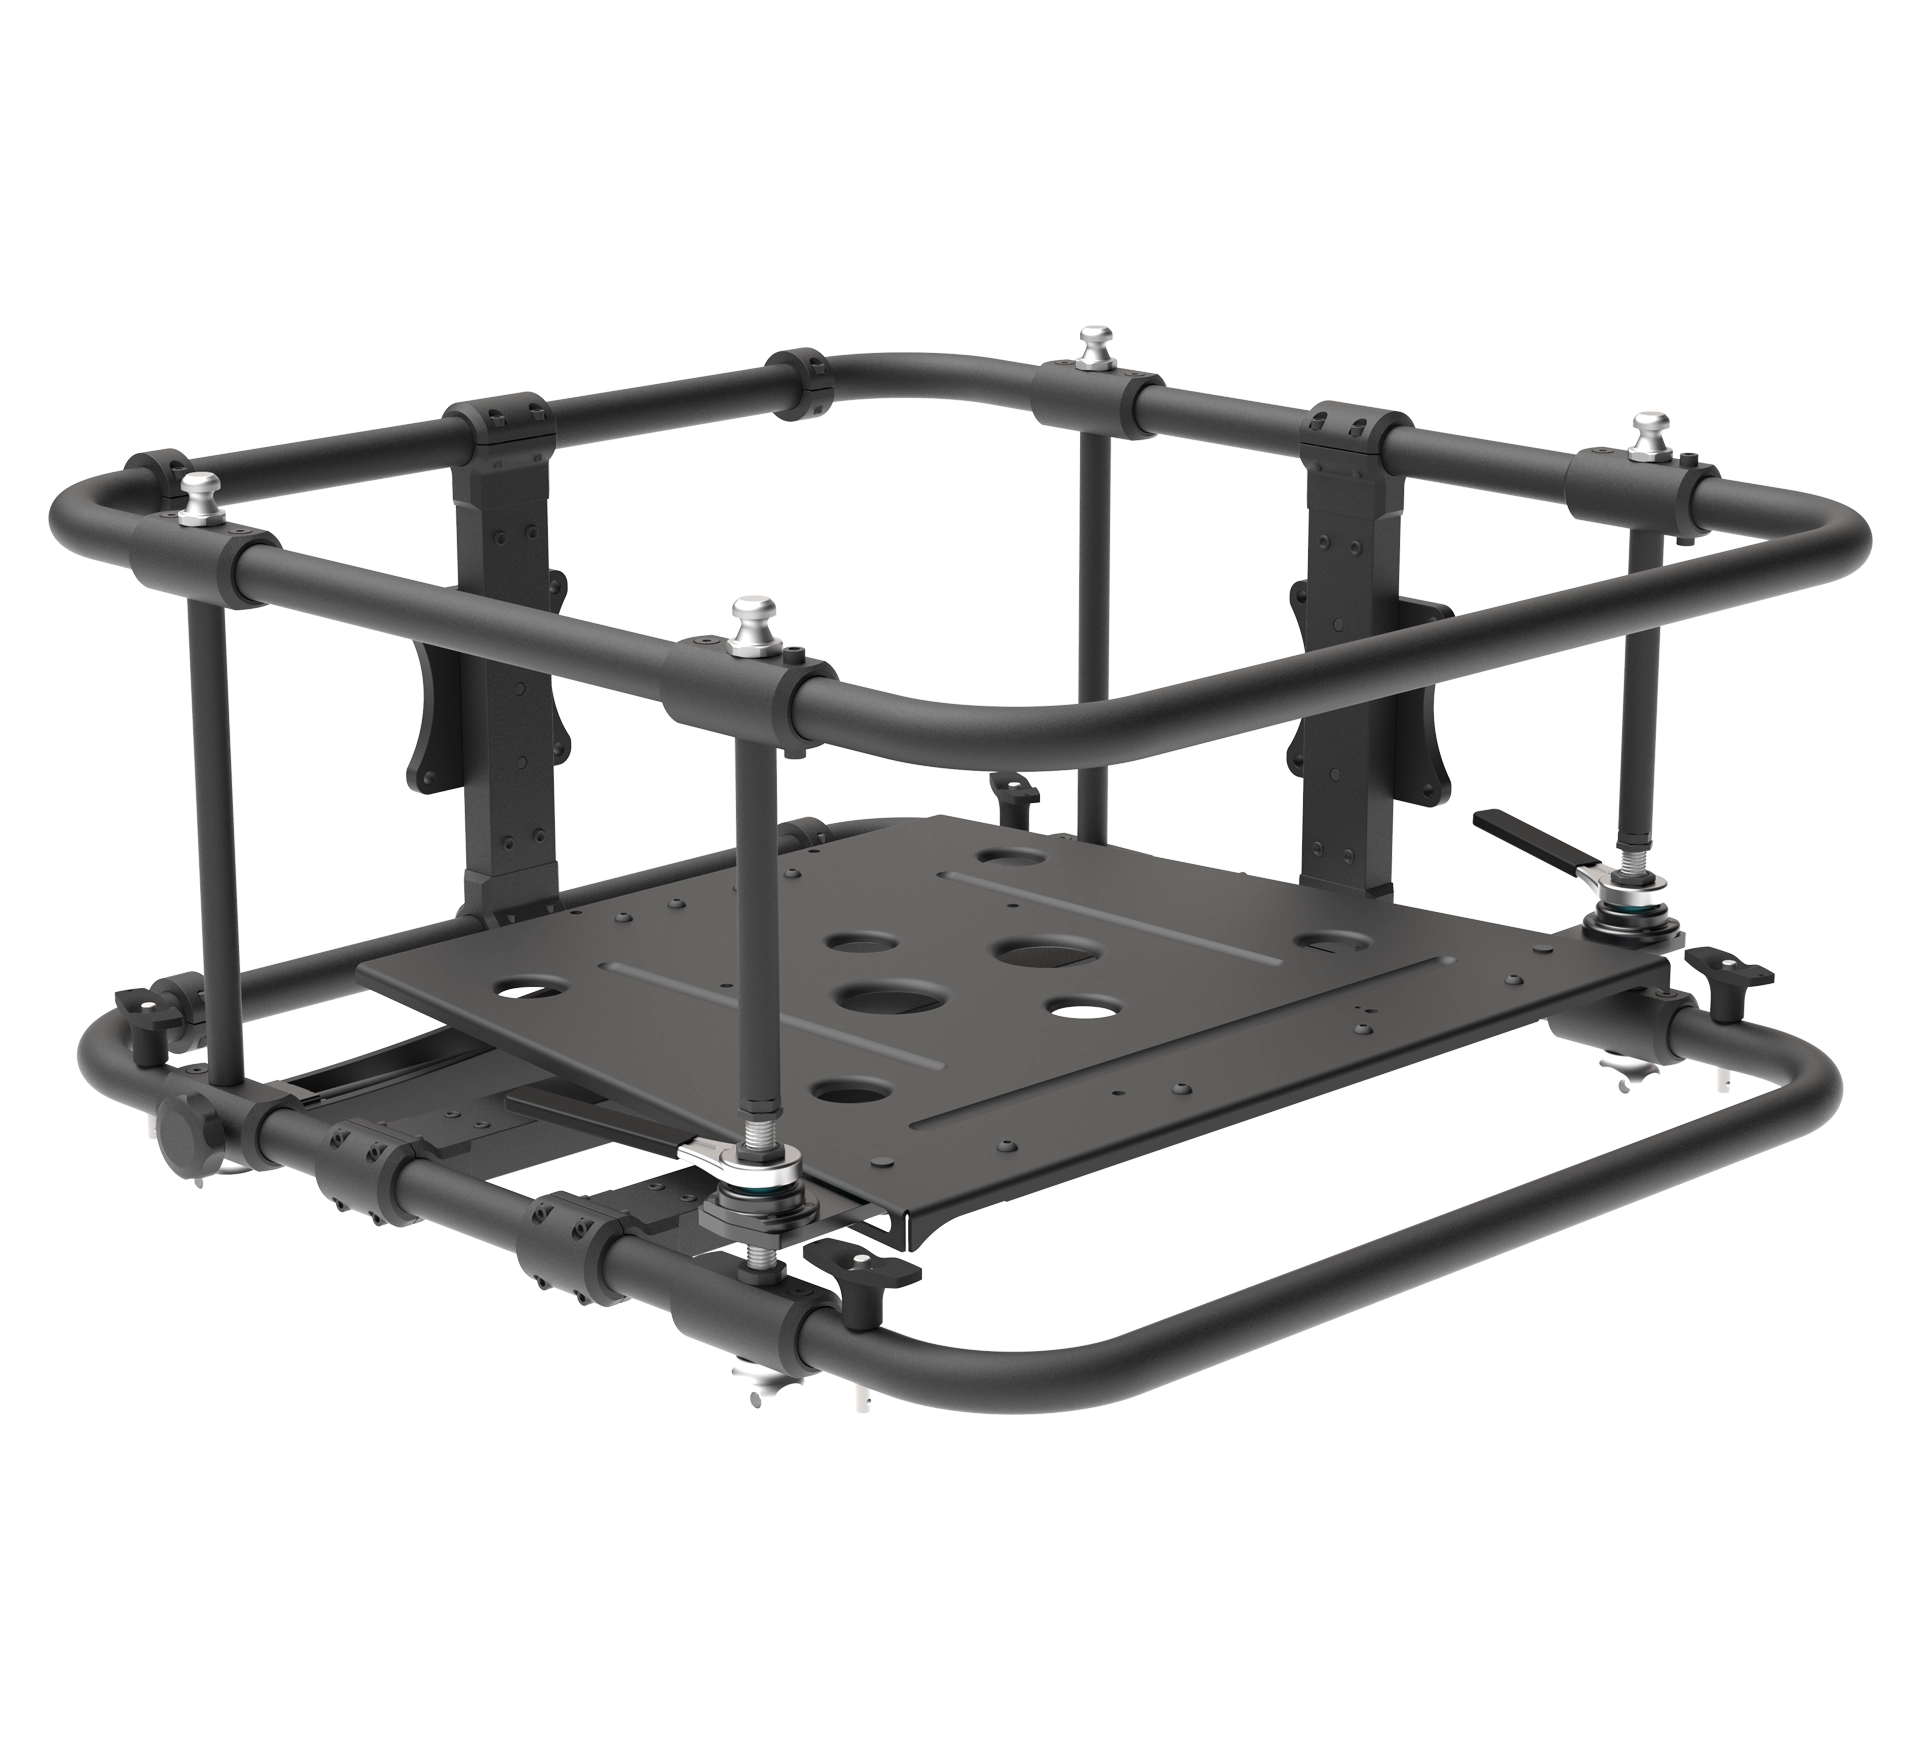 Rigtec Air Frame X15 Projector Rigging Frame